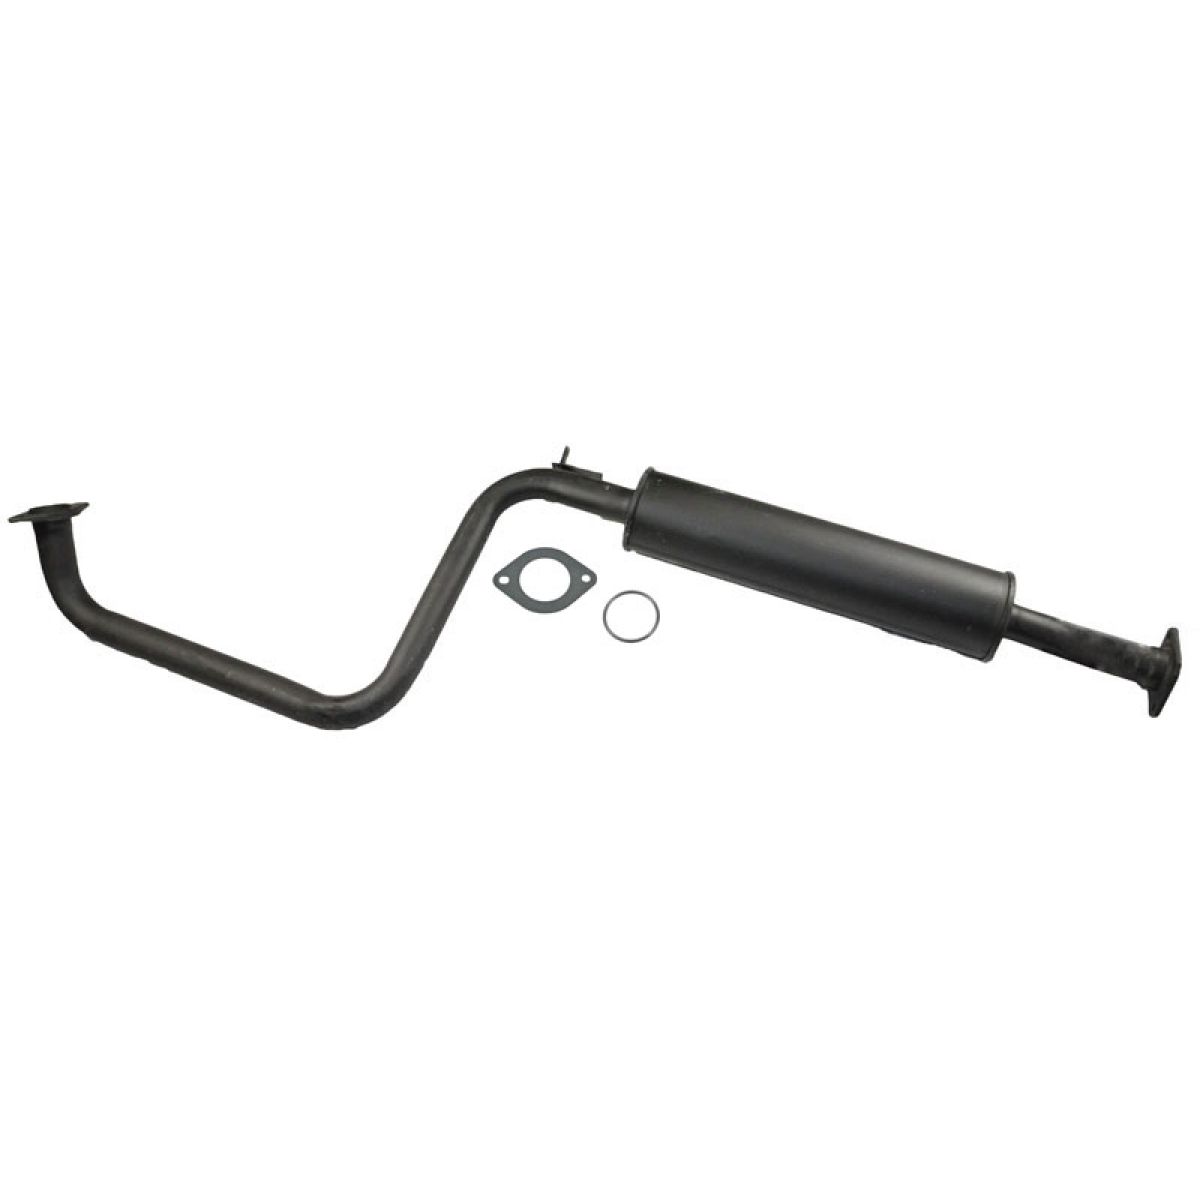 Intermediate Exhaust Pipe Resonator with Gaskets For 00-02 Nissan